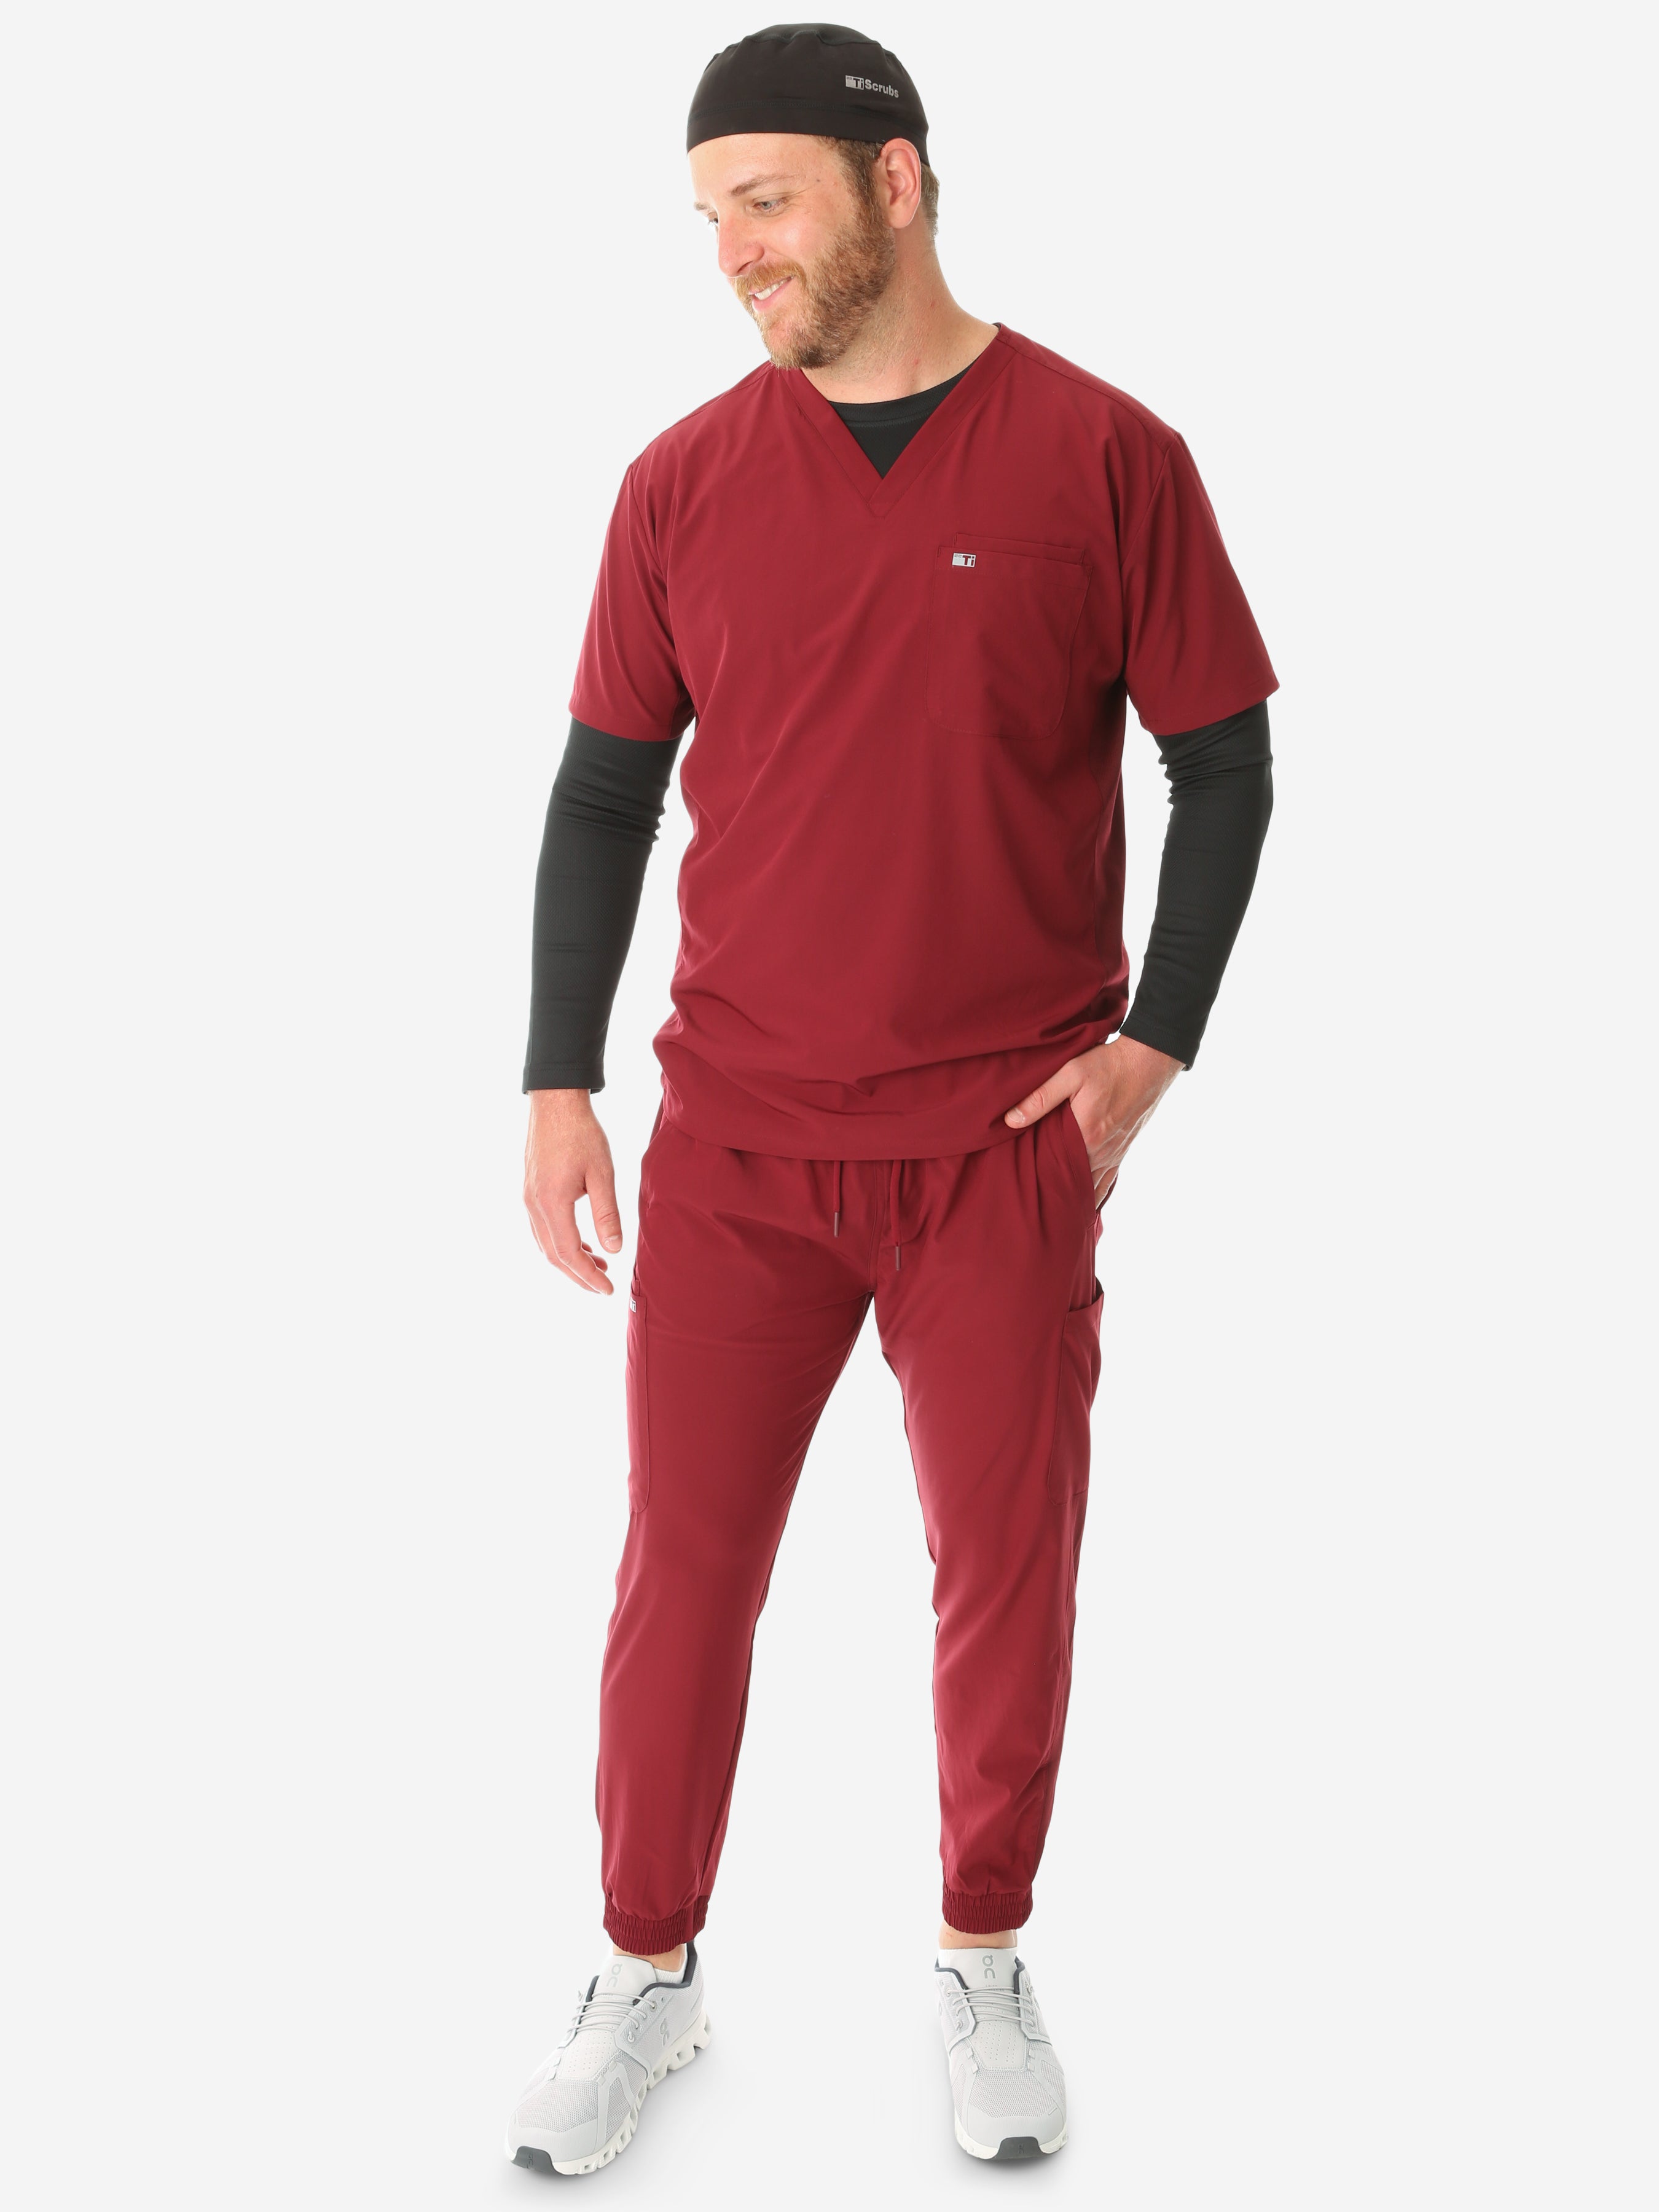 TiScrubs Stretch Men&#39;s Bold Burgundy Stretch Jogger Scrub Pants and Double-Pocket Top Untucked Long Sleeve Black Underscrub and Scrub Cap Full Body Front